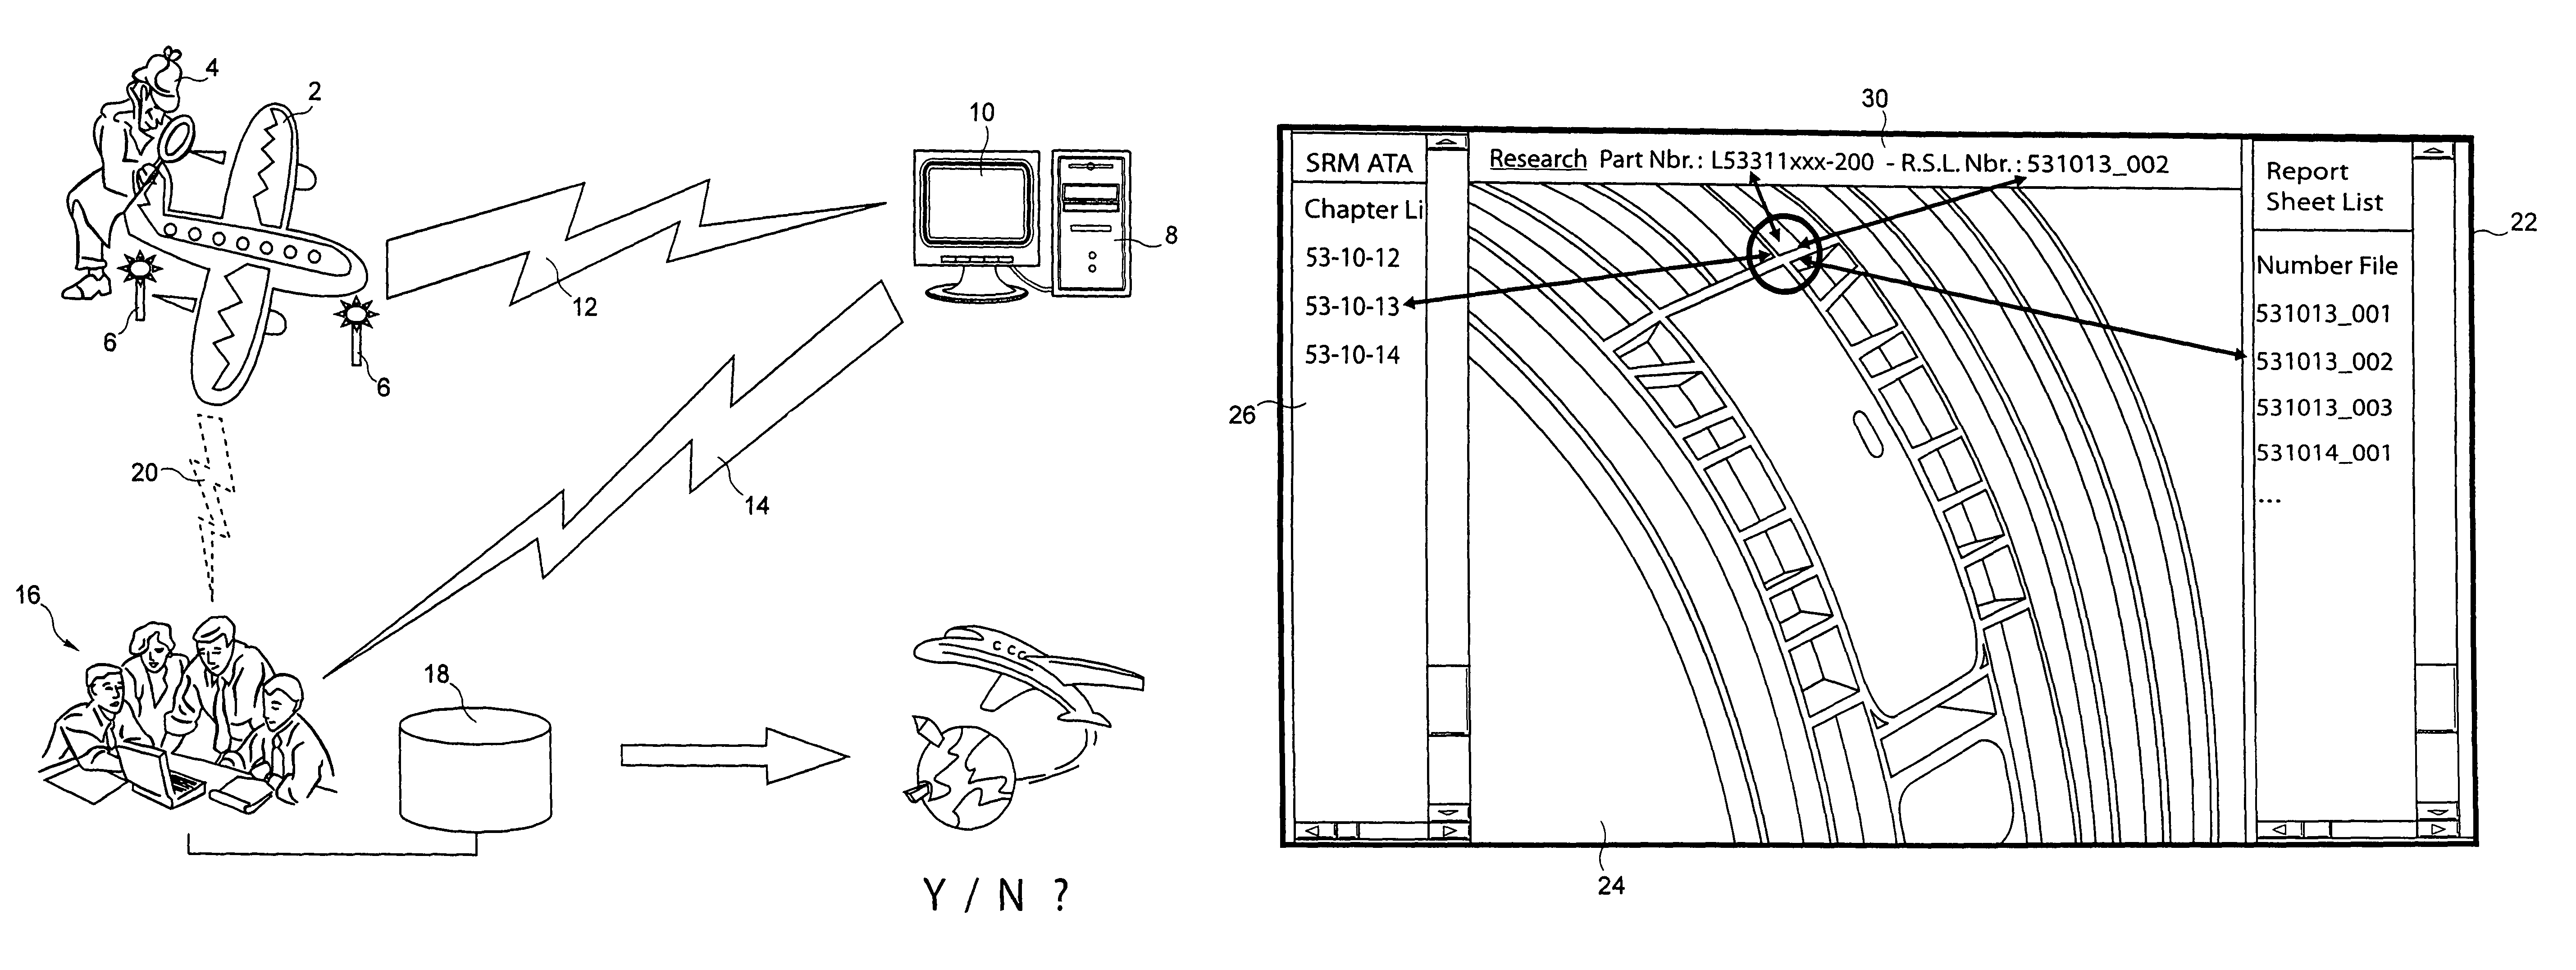 Diagnostic tool for repairing aircraft and method of using such a tool